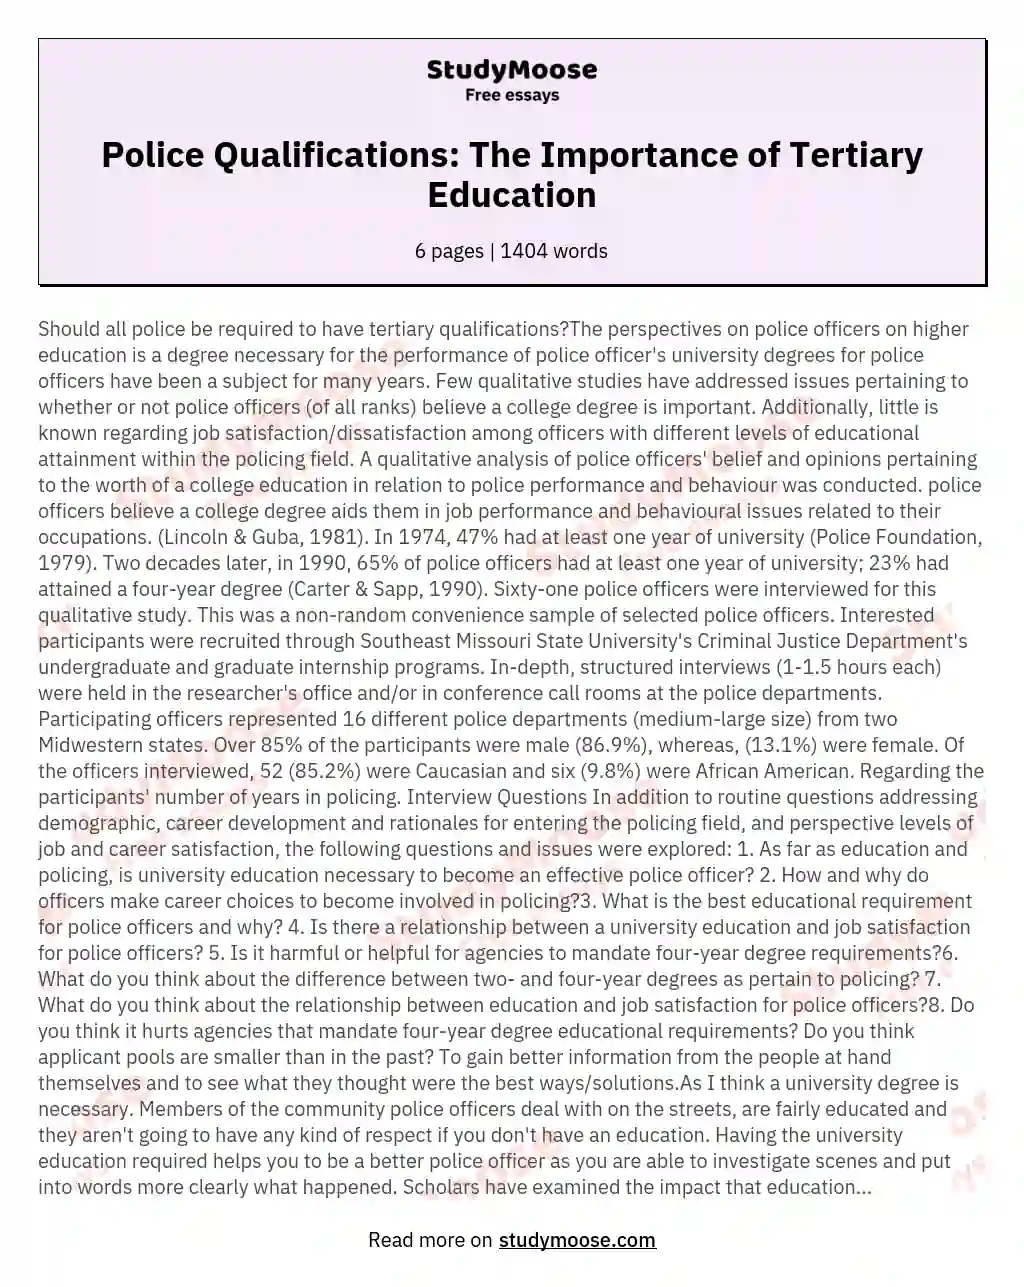 Should all police be required to have tertiary qualifications?The perspectives on police